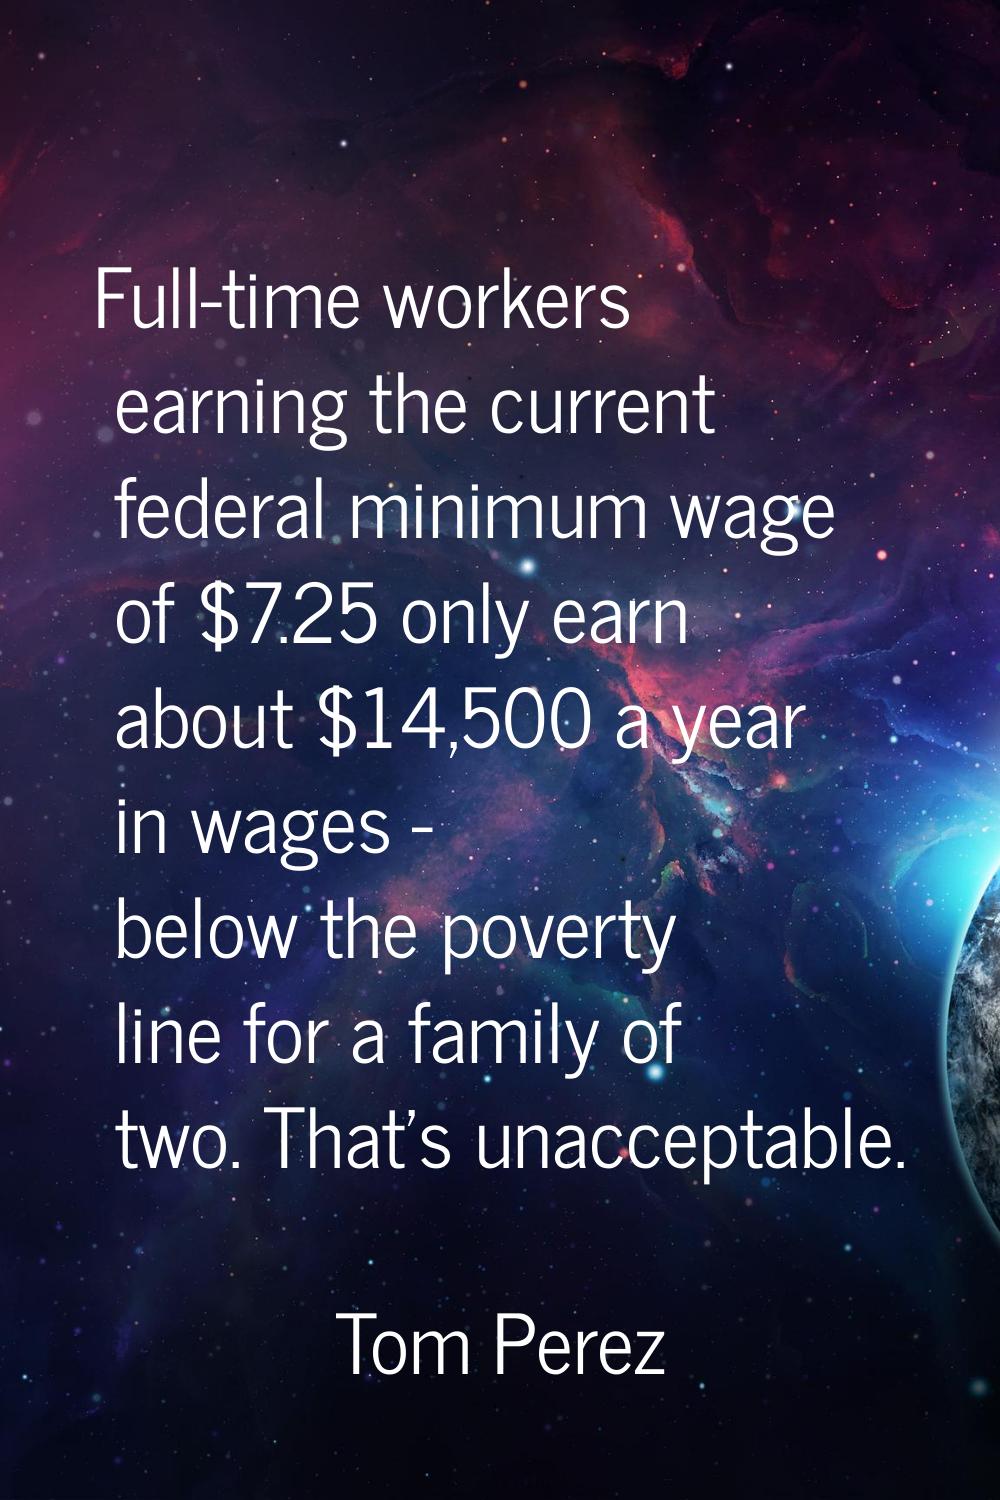 Full-time workers earning the current federal minimum wage of $7.25 only earn about $14,500 a year 